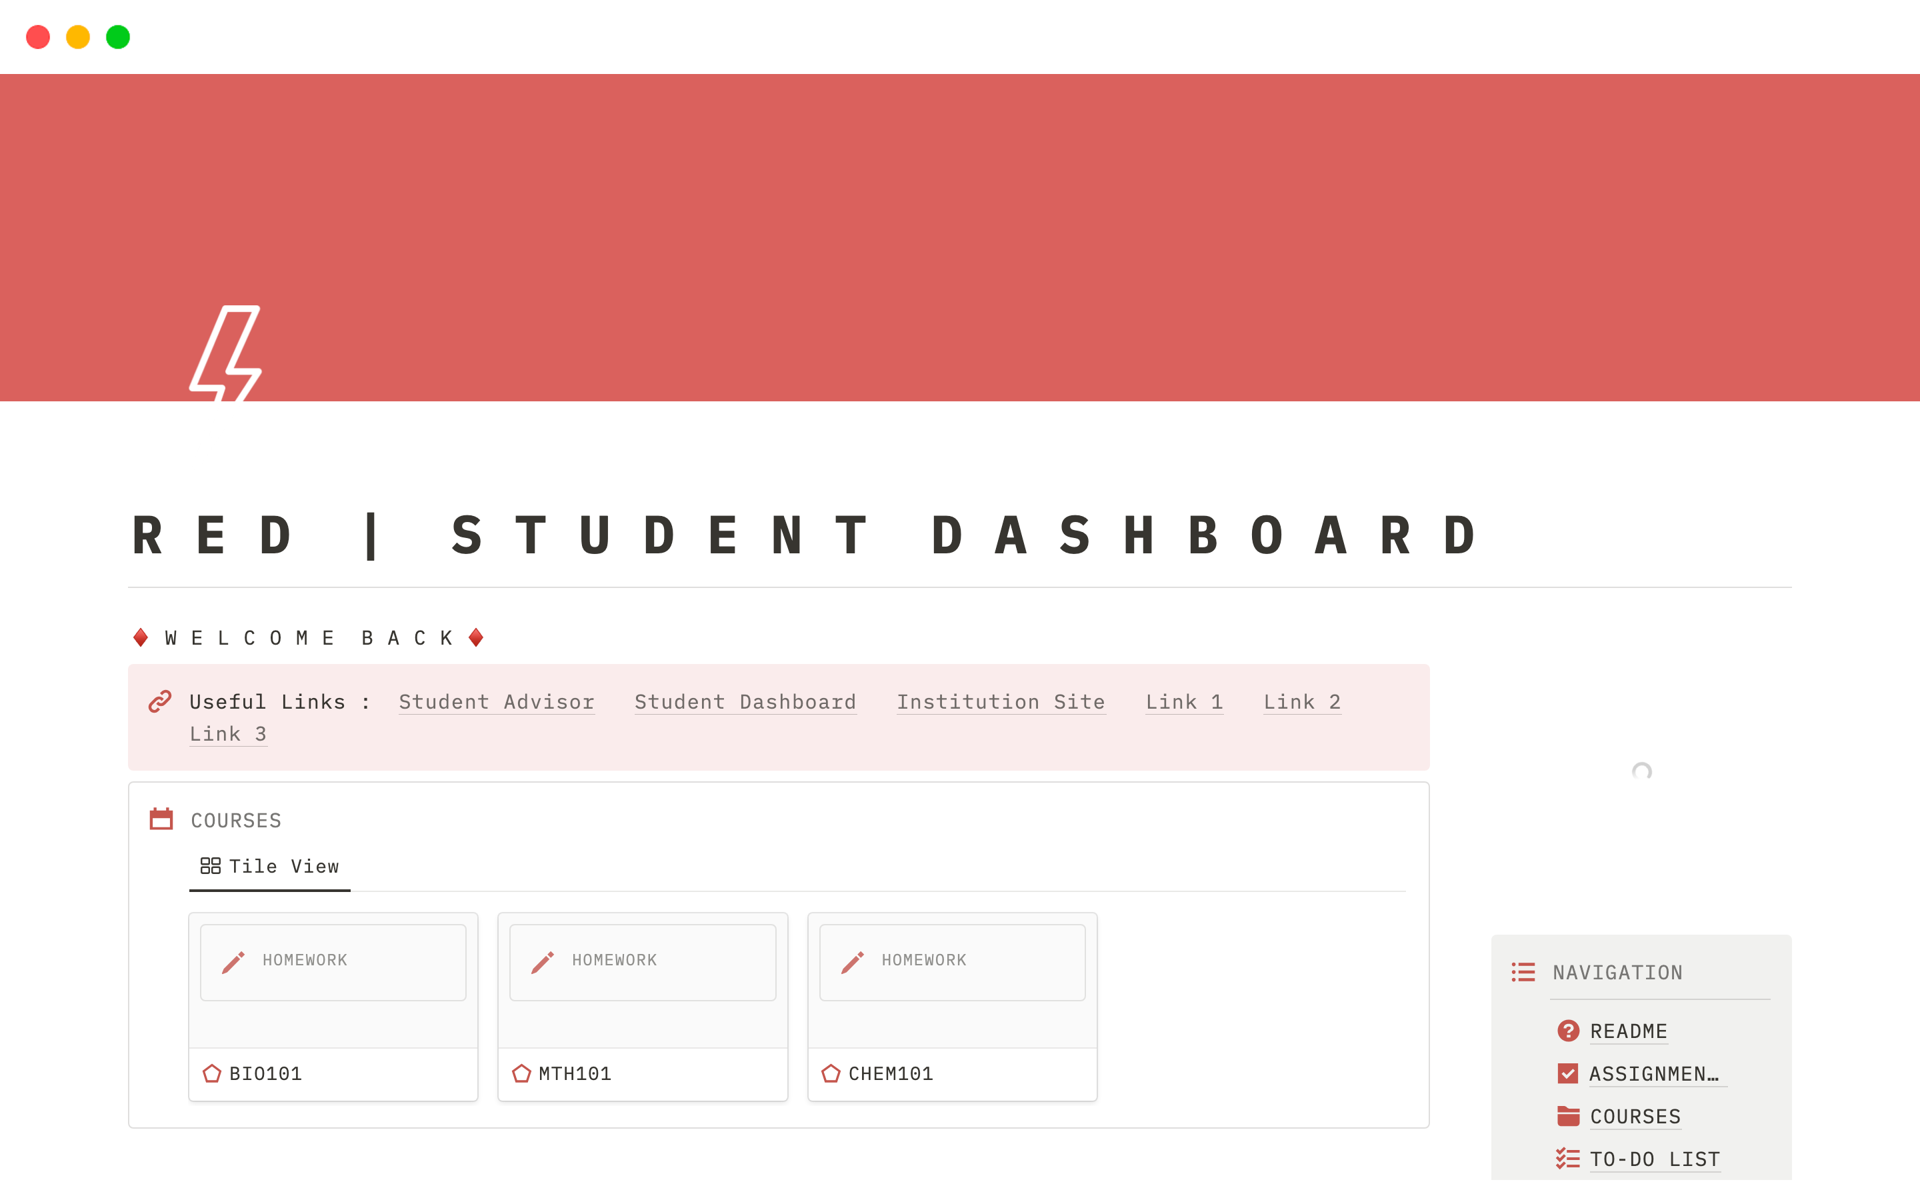 Minimal yet powerful dashboard for sudents.